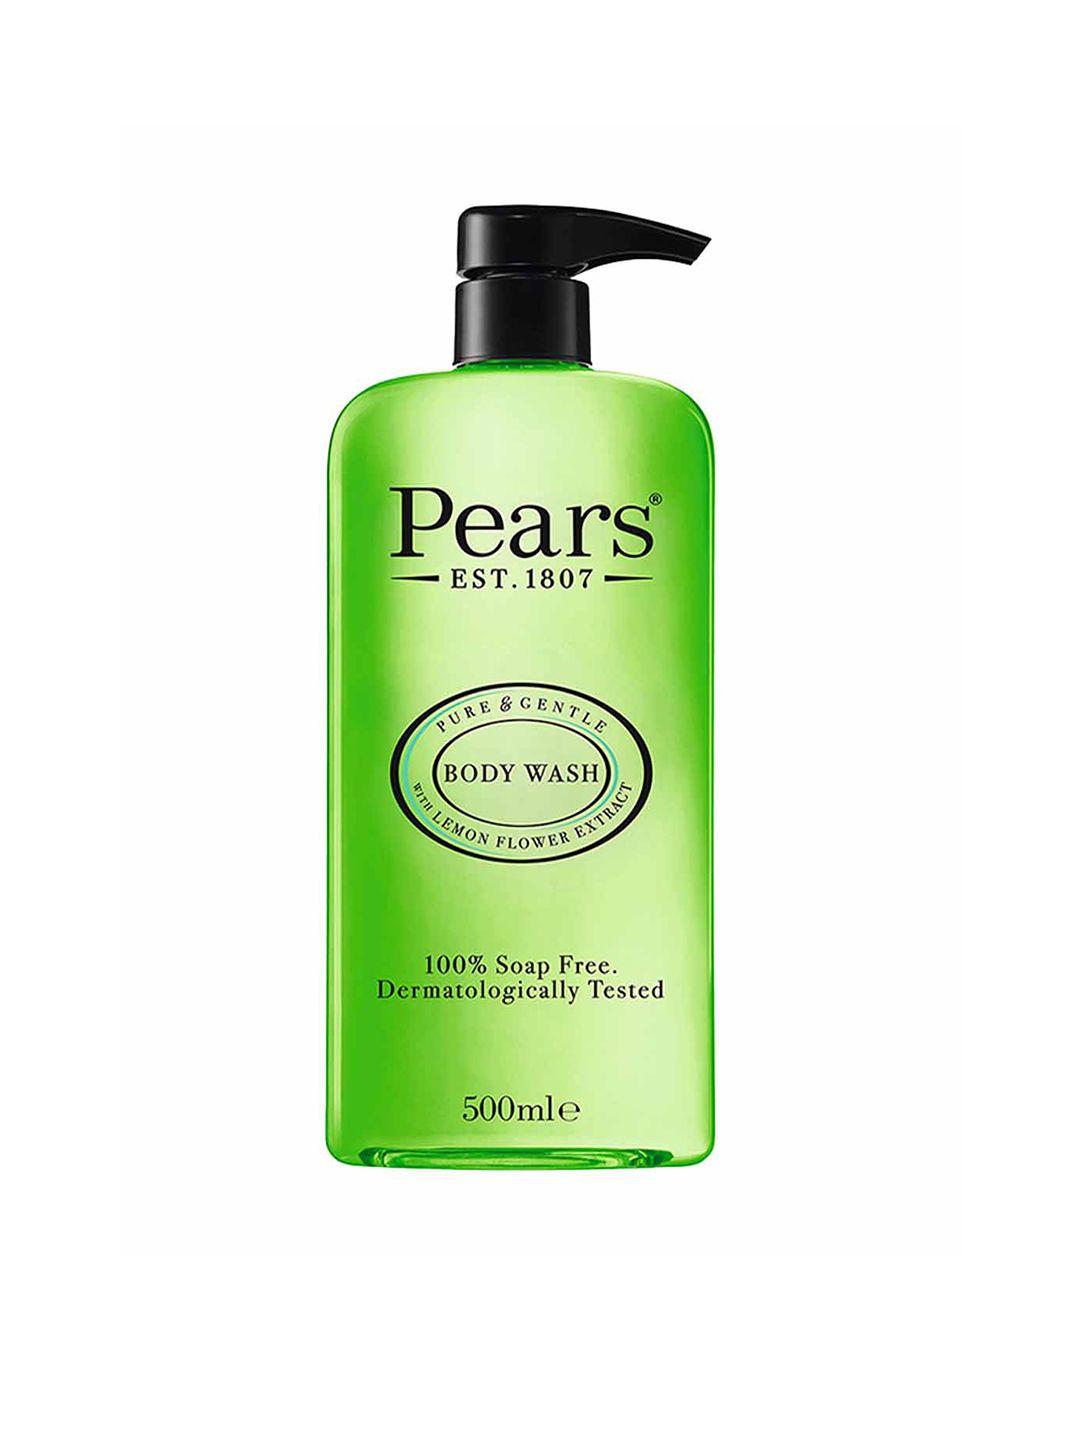 pears pure & gentle body wash with lemon flower extract 500 ml